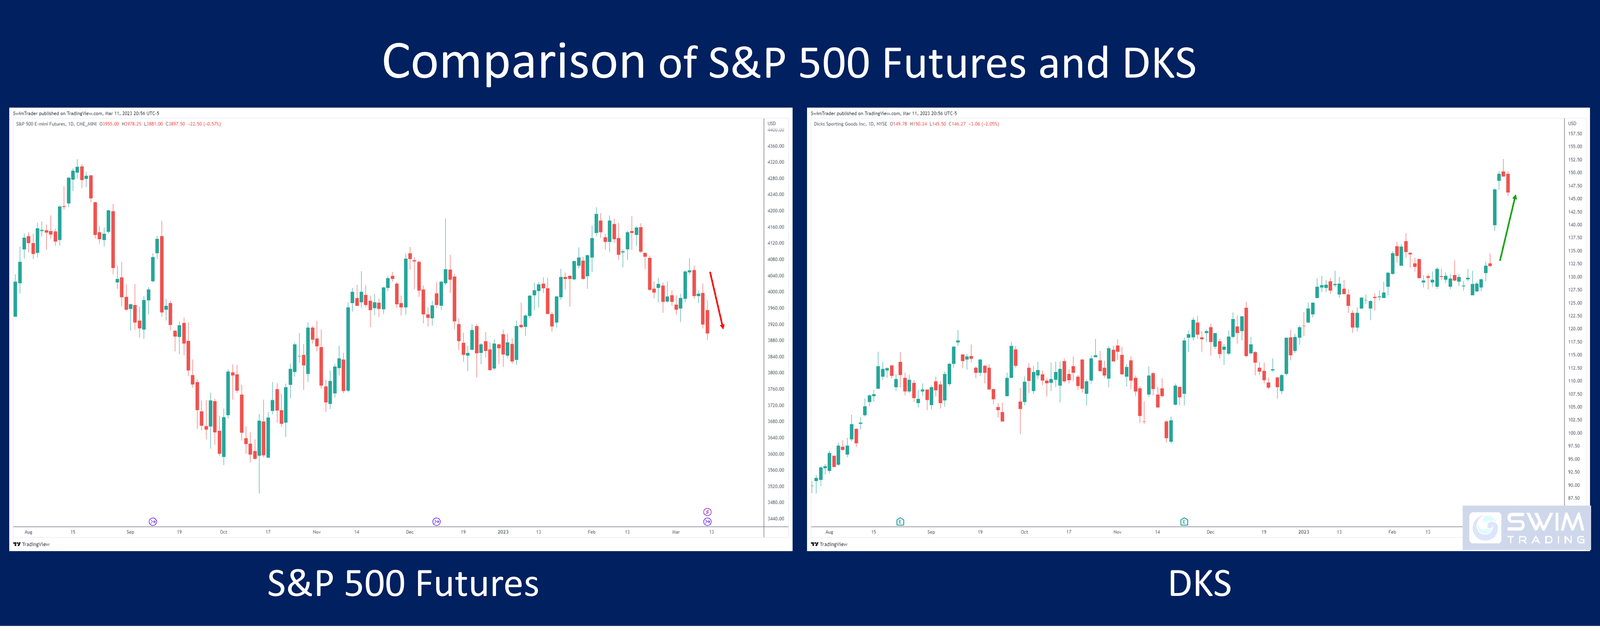 Comparison between the S&P 500 futures and DICK's Sporting Goods